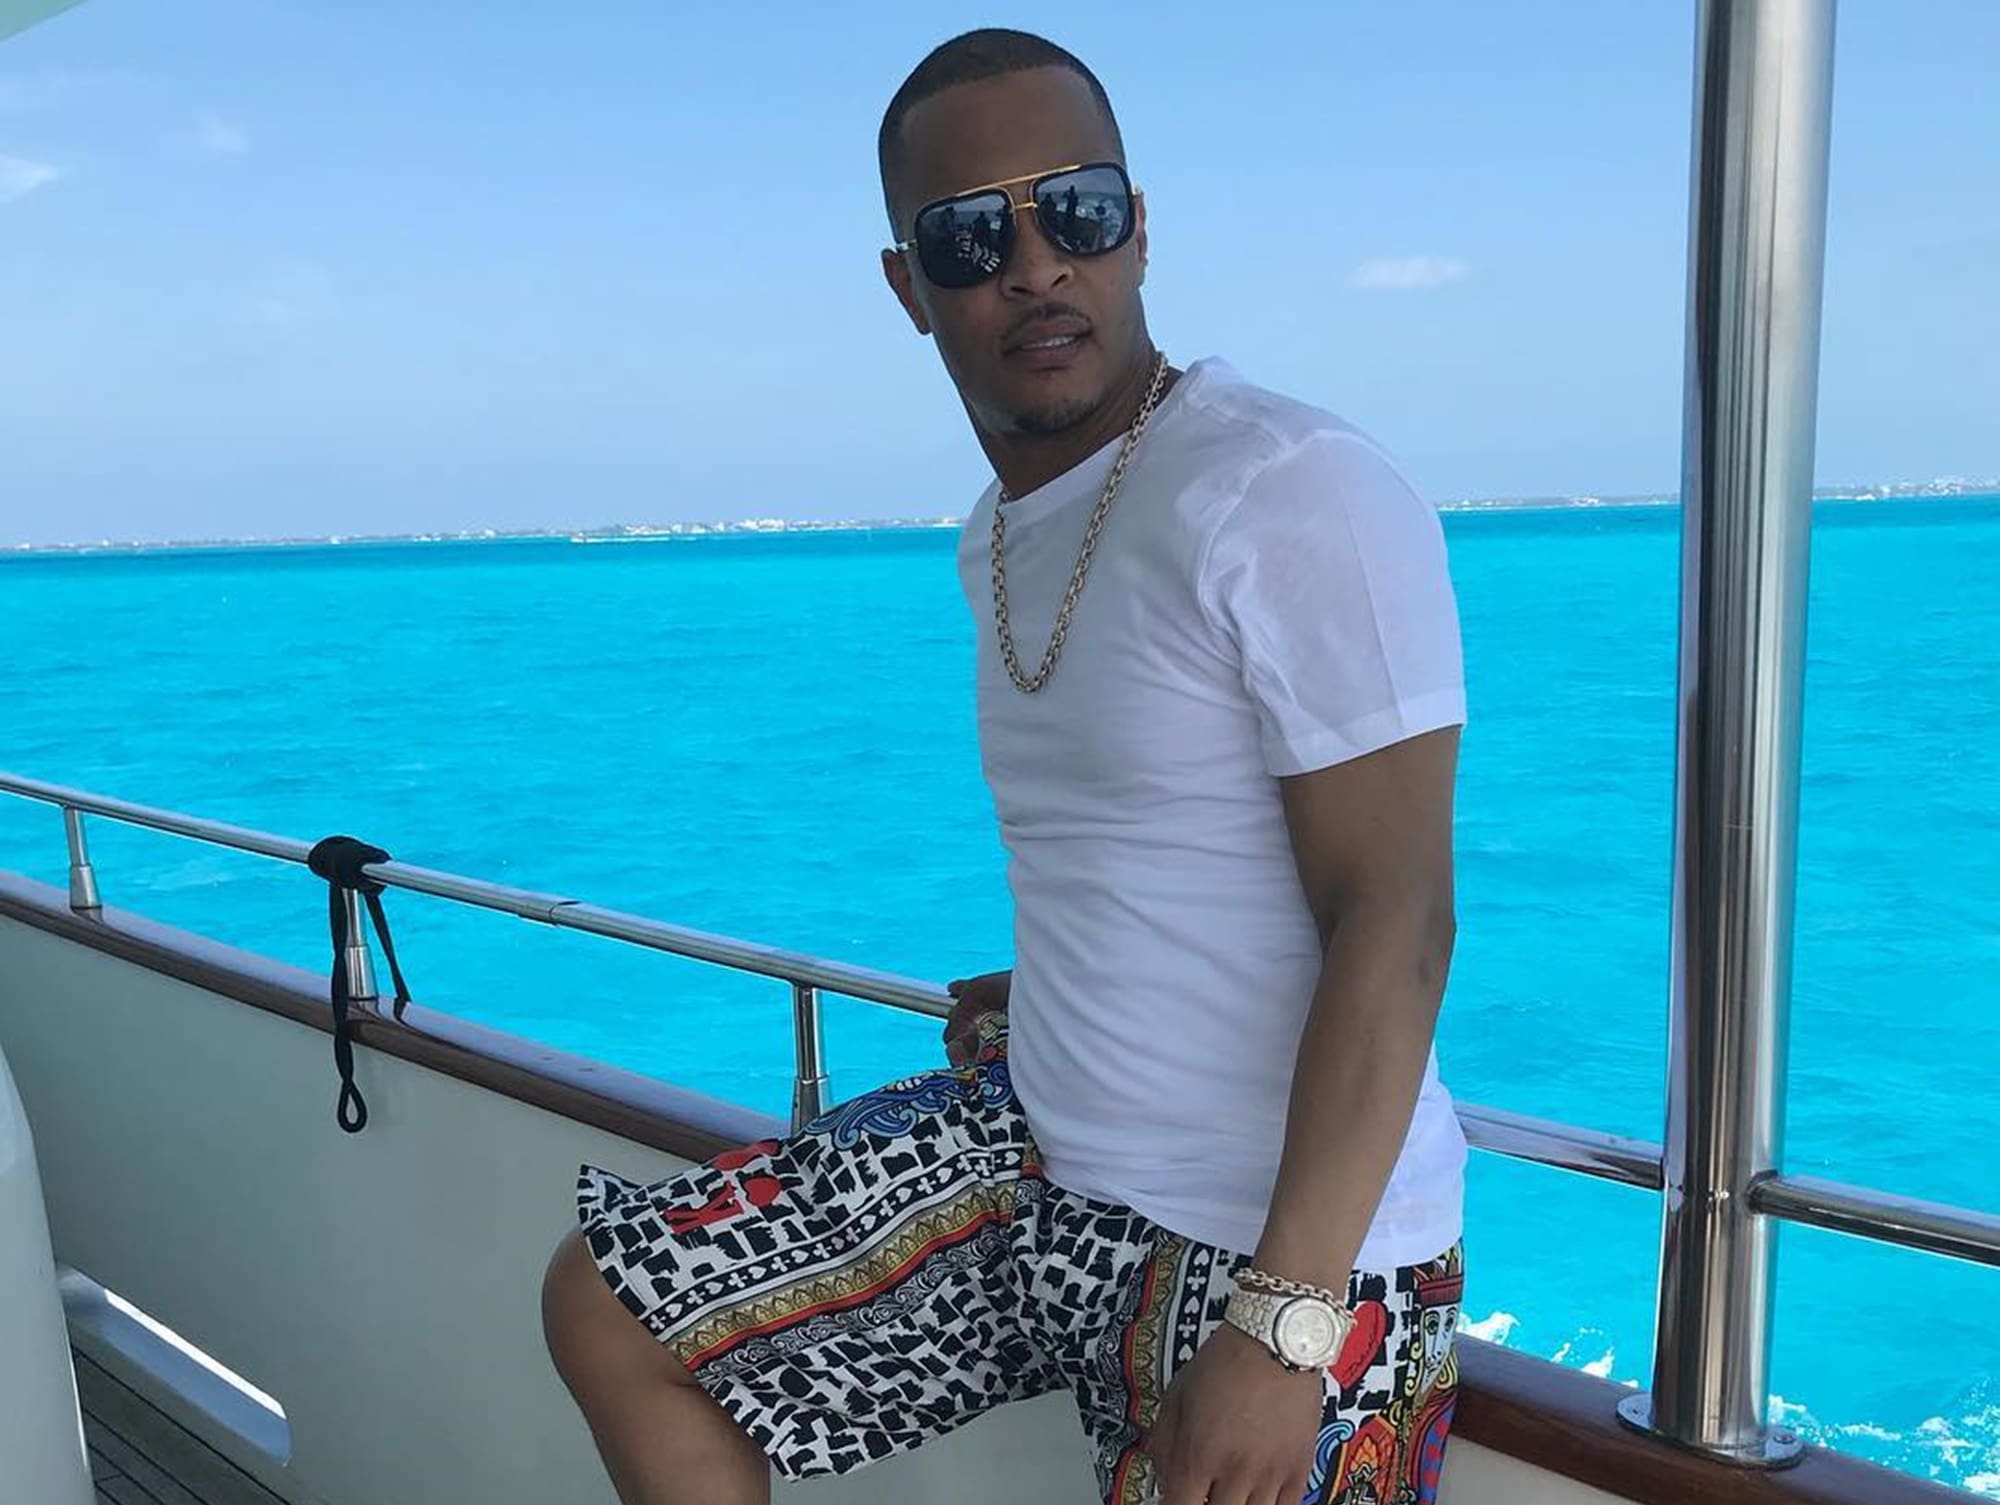 Tiny Harris And T.I. Enjoy A Baecation While Celebrating Their 9th Anniversary - See The Video